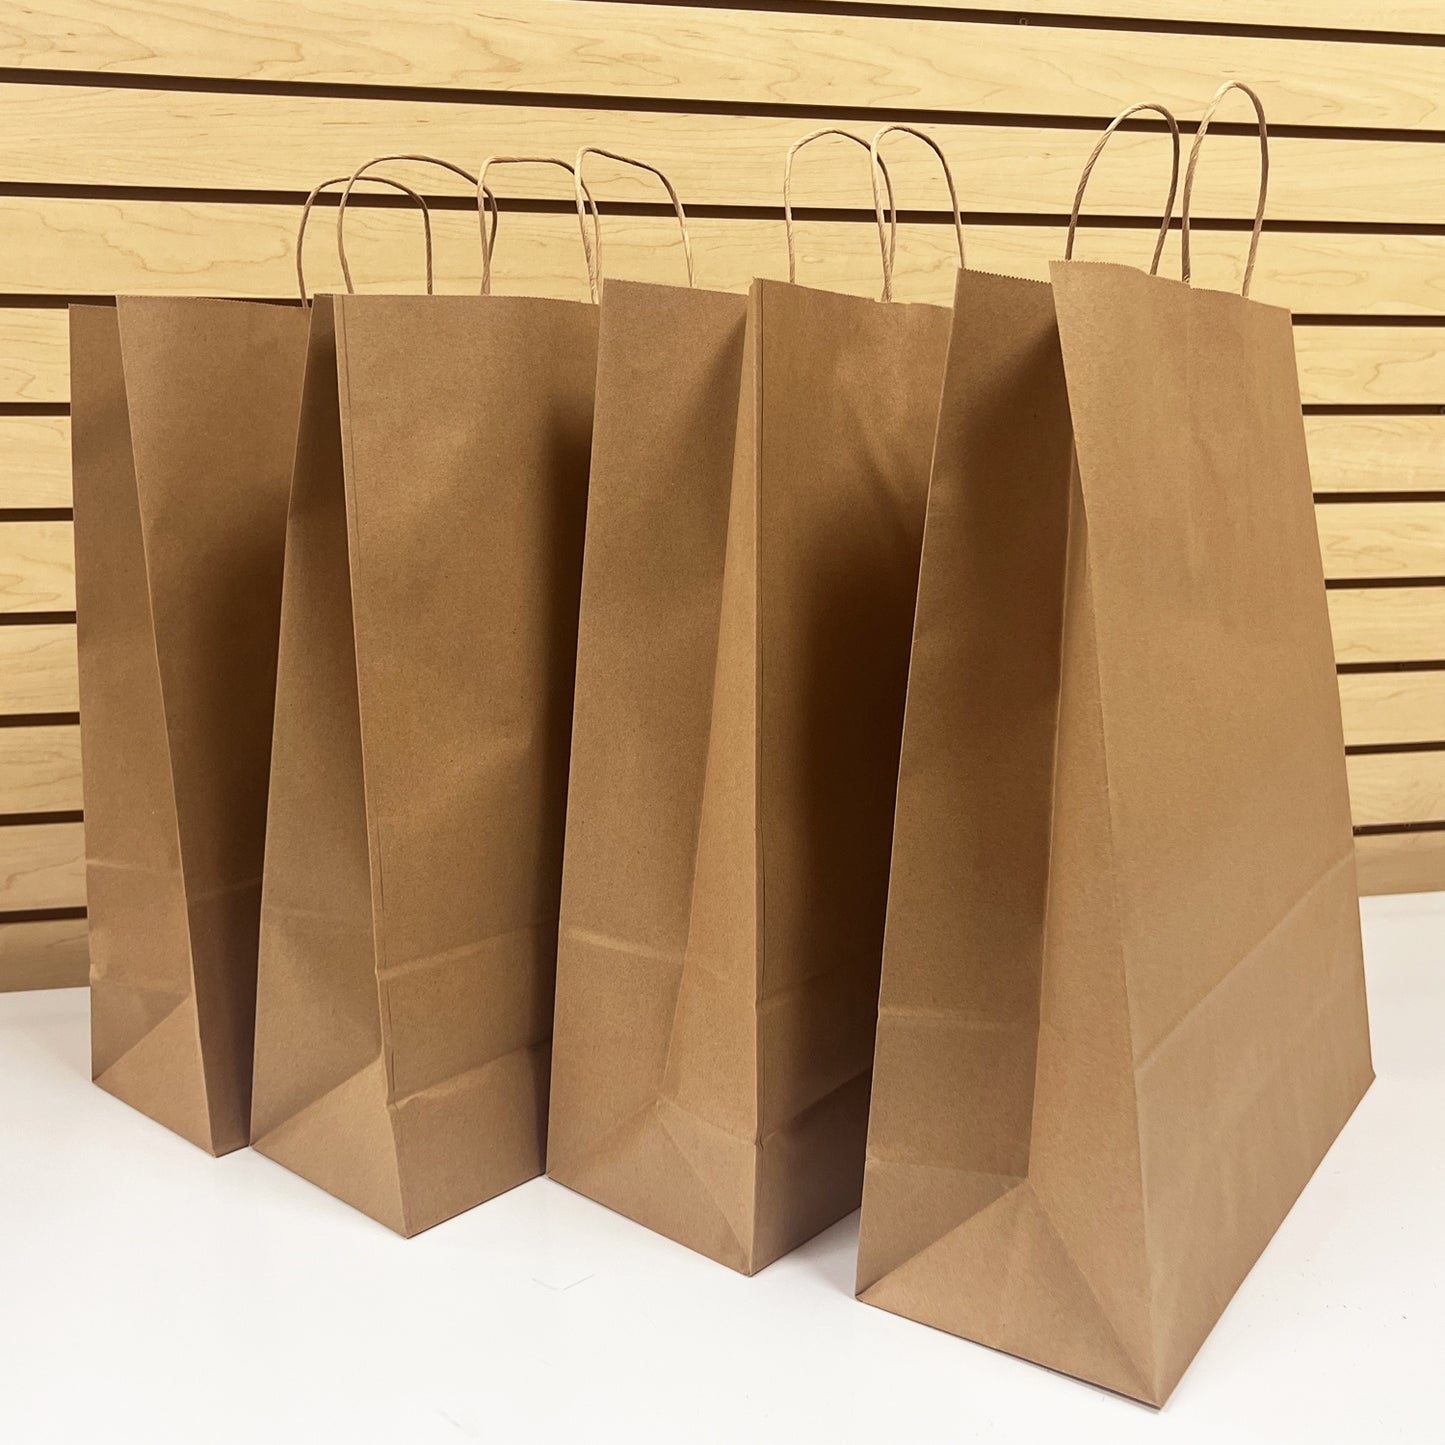 200 Pcs, Queen, 16x6x19.25 inches, Kraft Paper Bags, with Twisted Handles